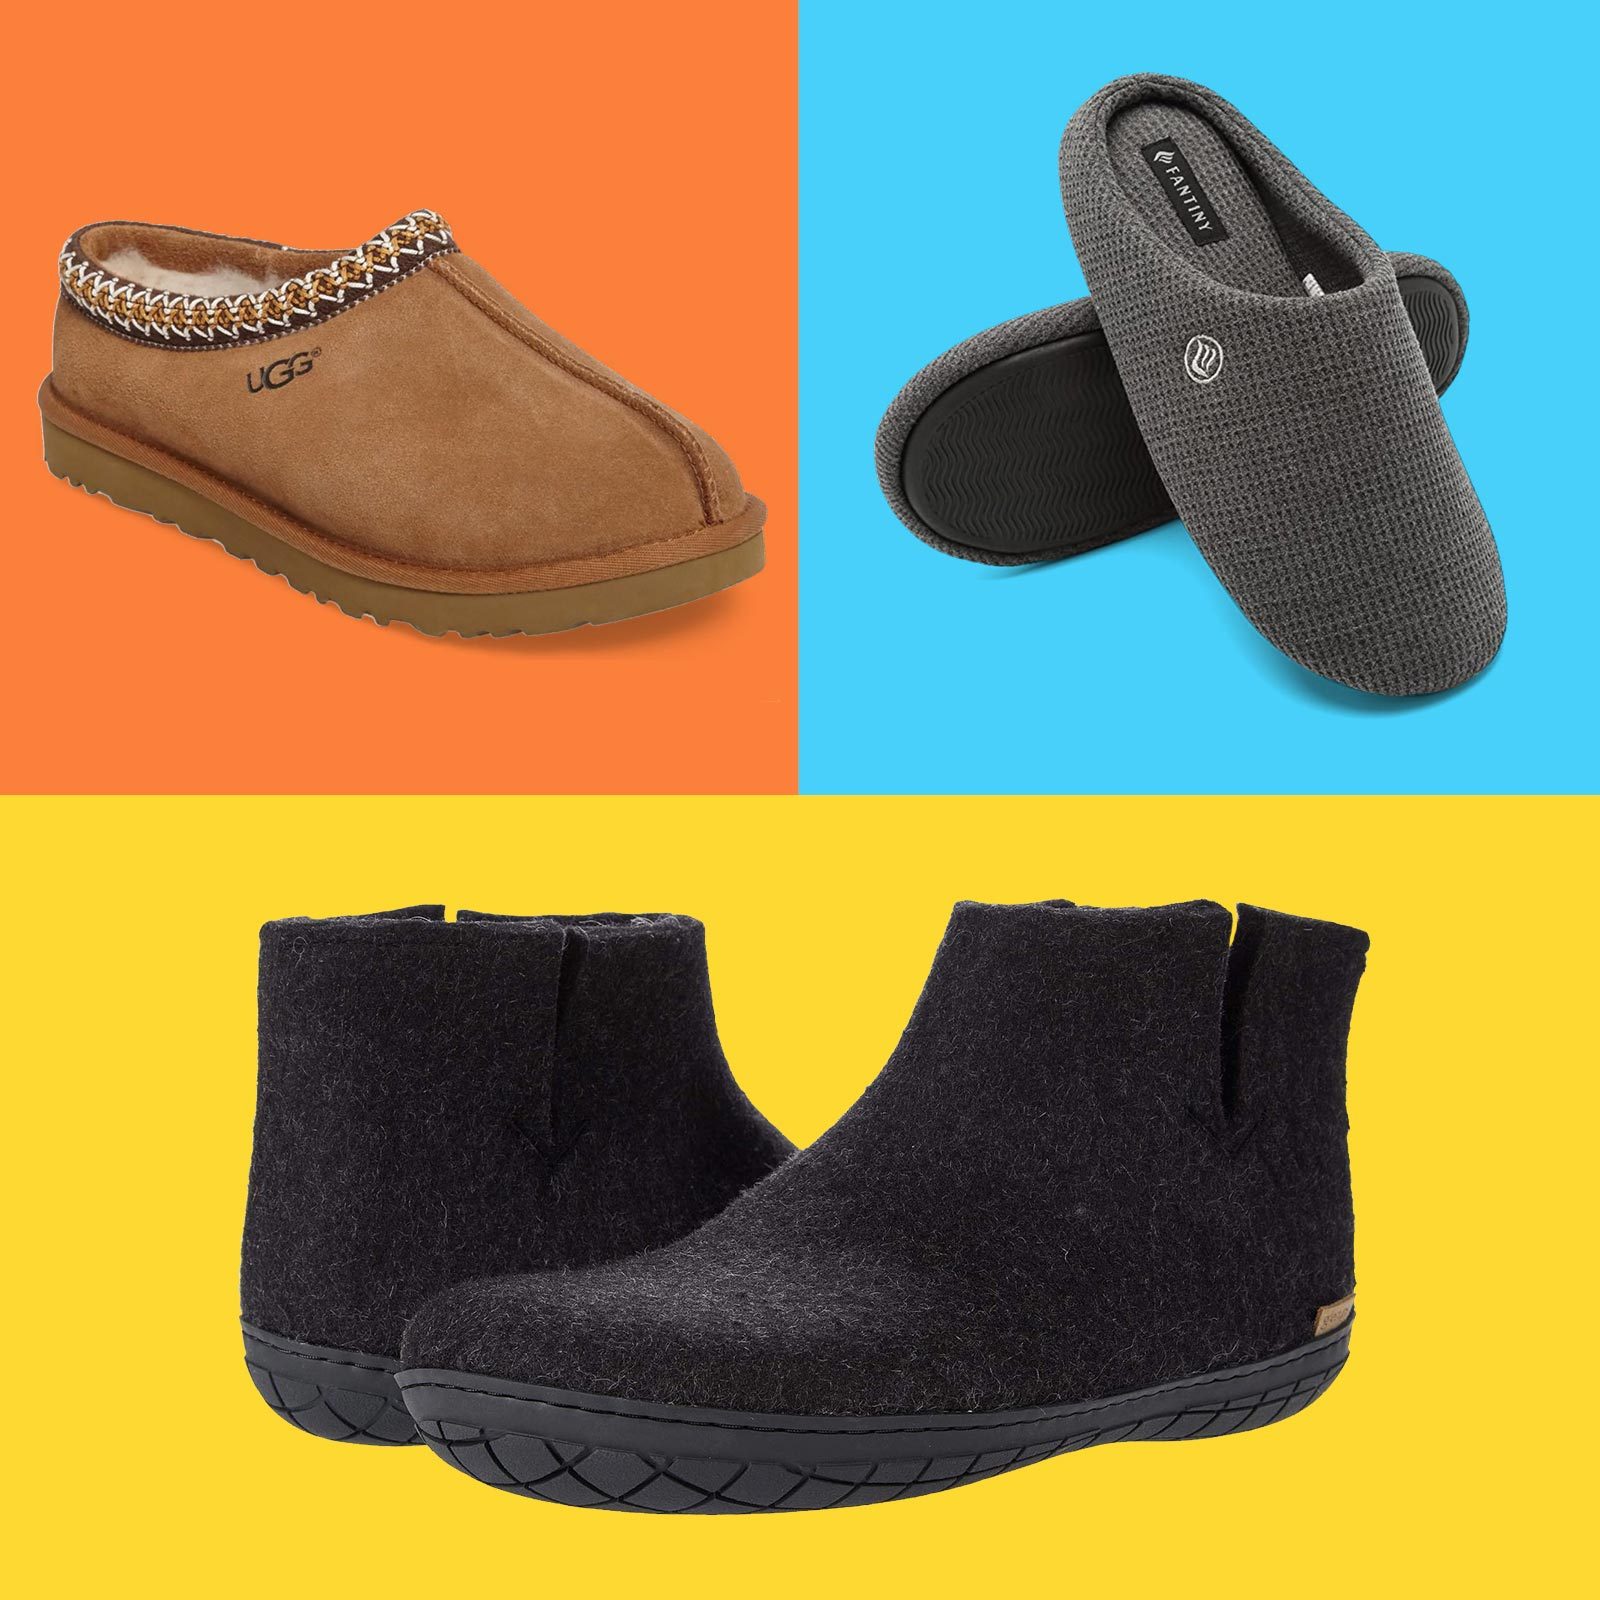 Best Men's Slippers 2021 | Comfy Men's the House More